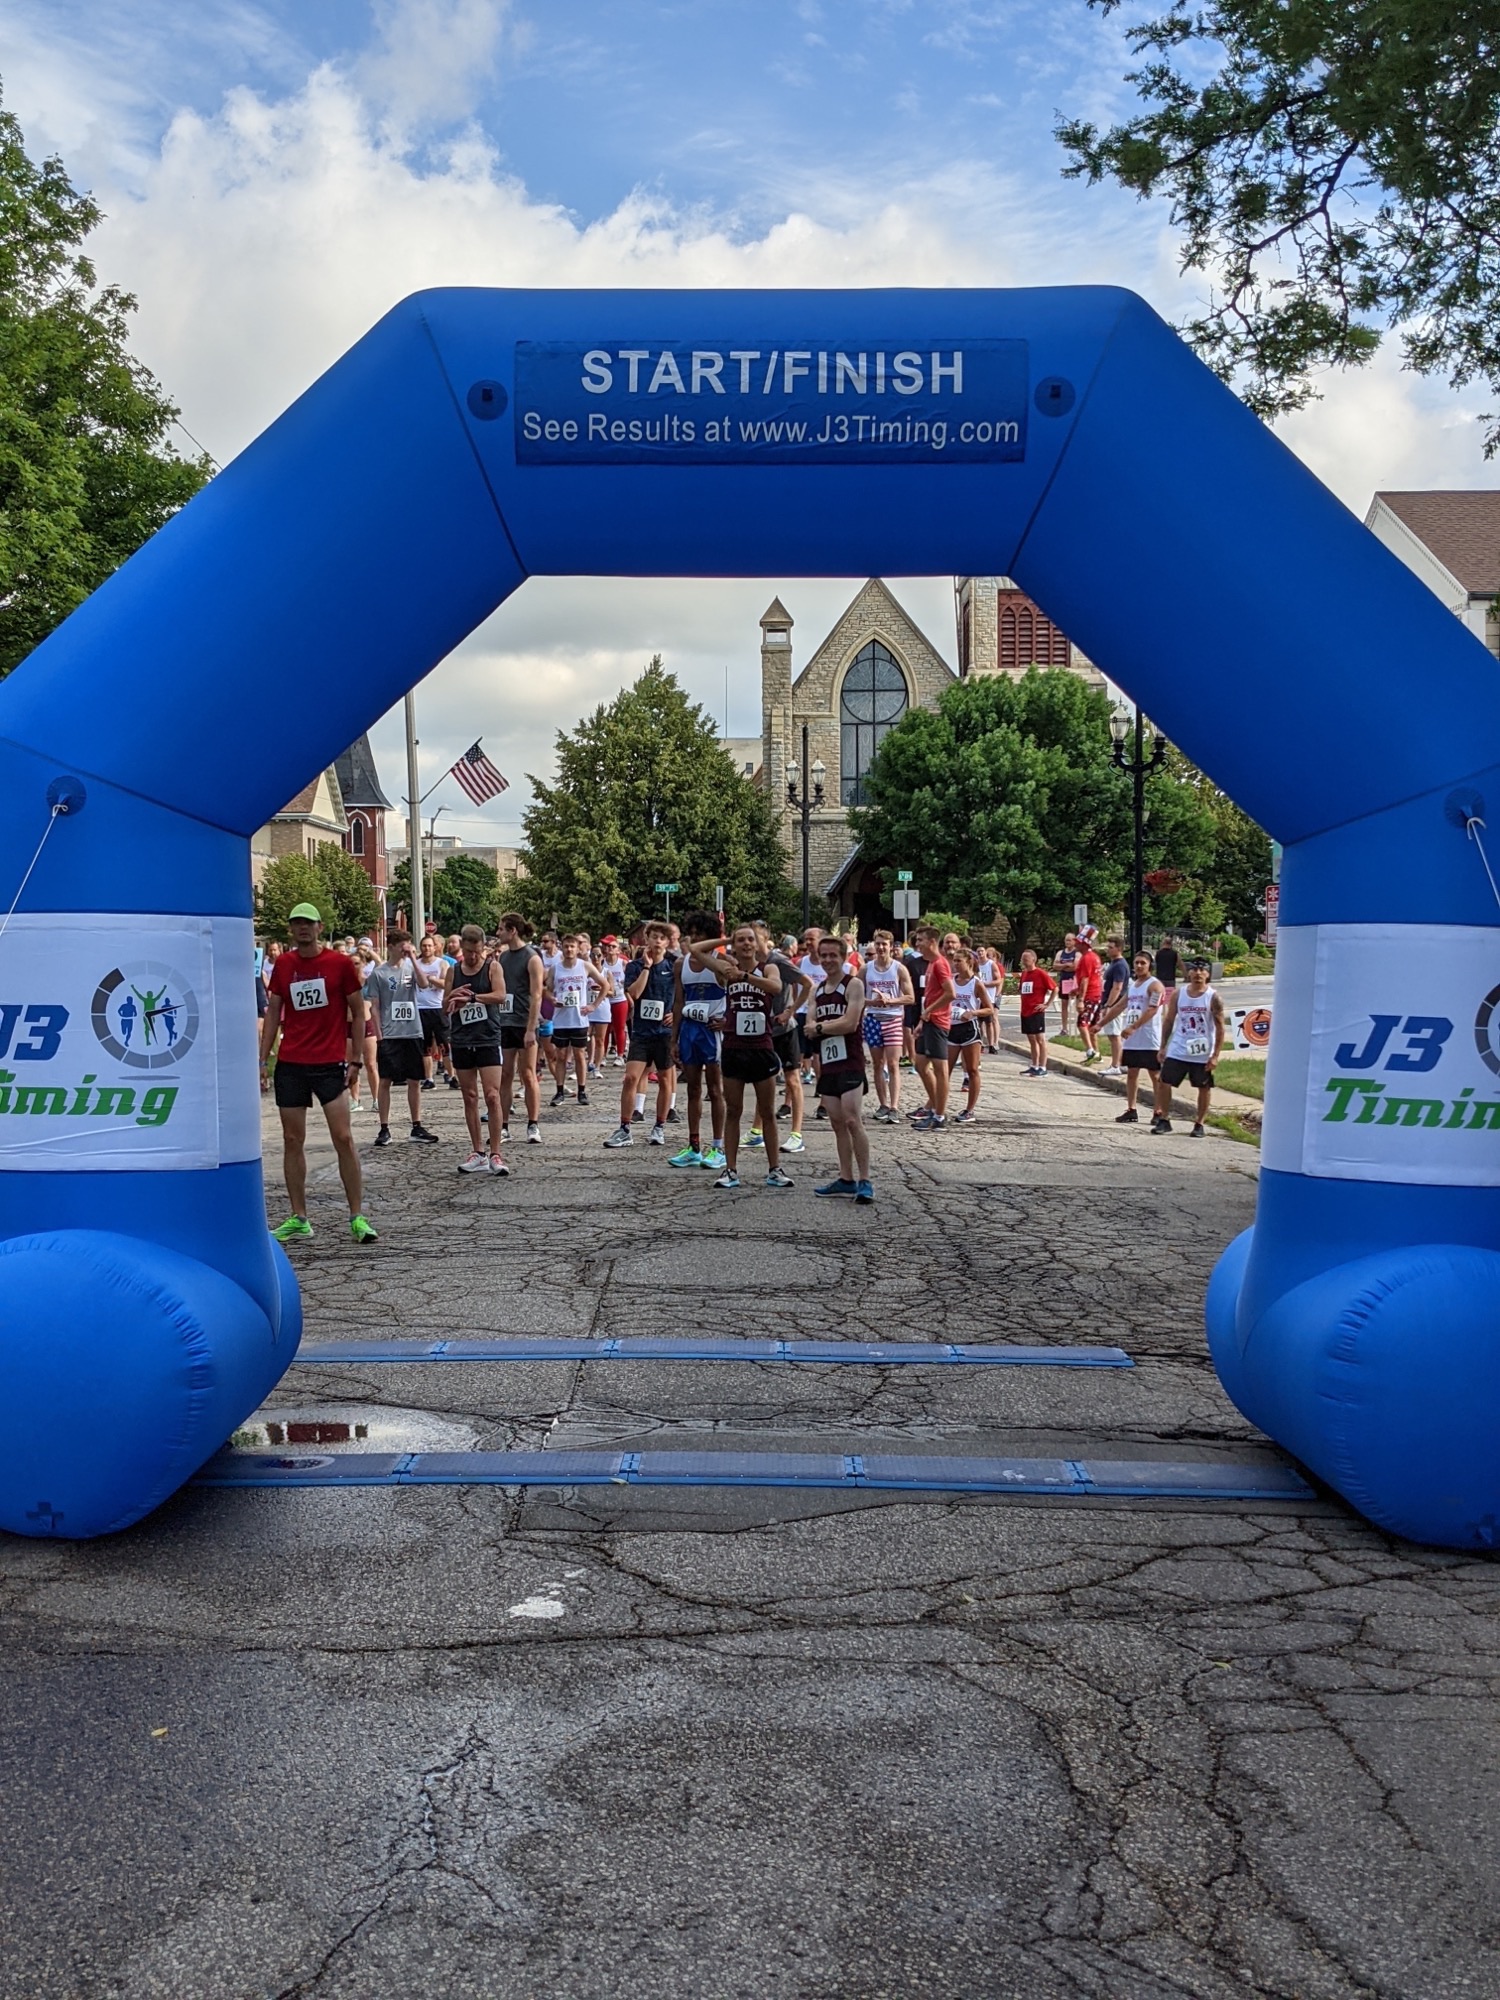 The finish line at the YMCA 5k race.